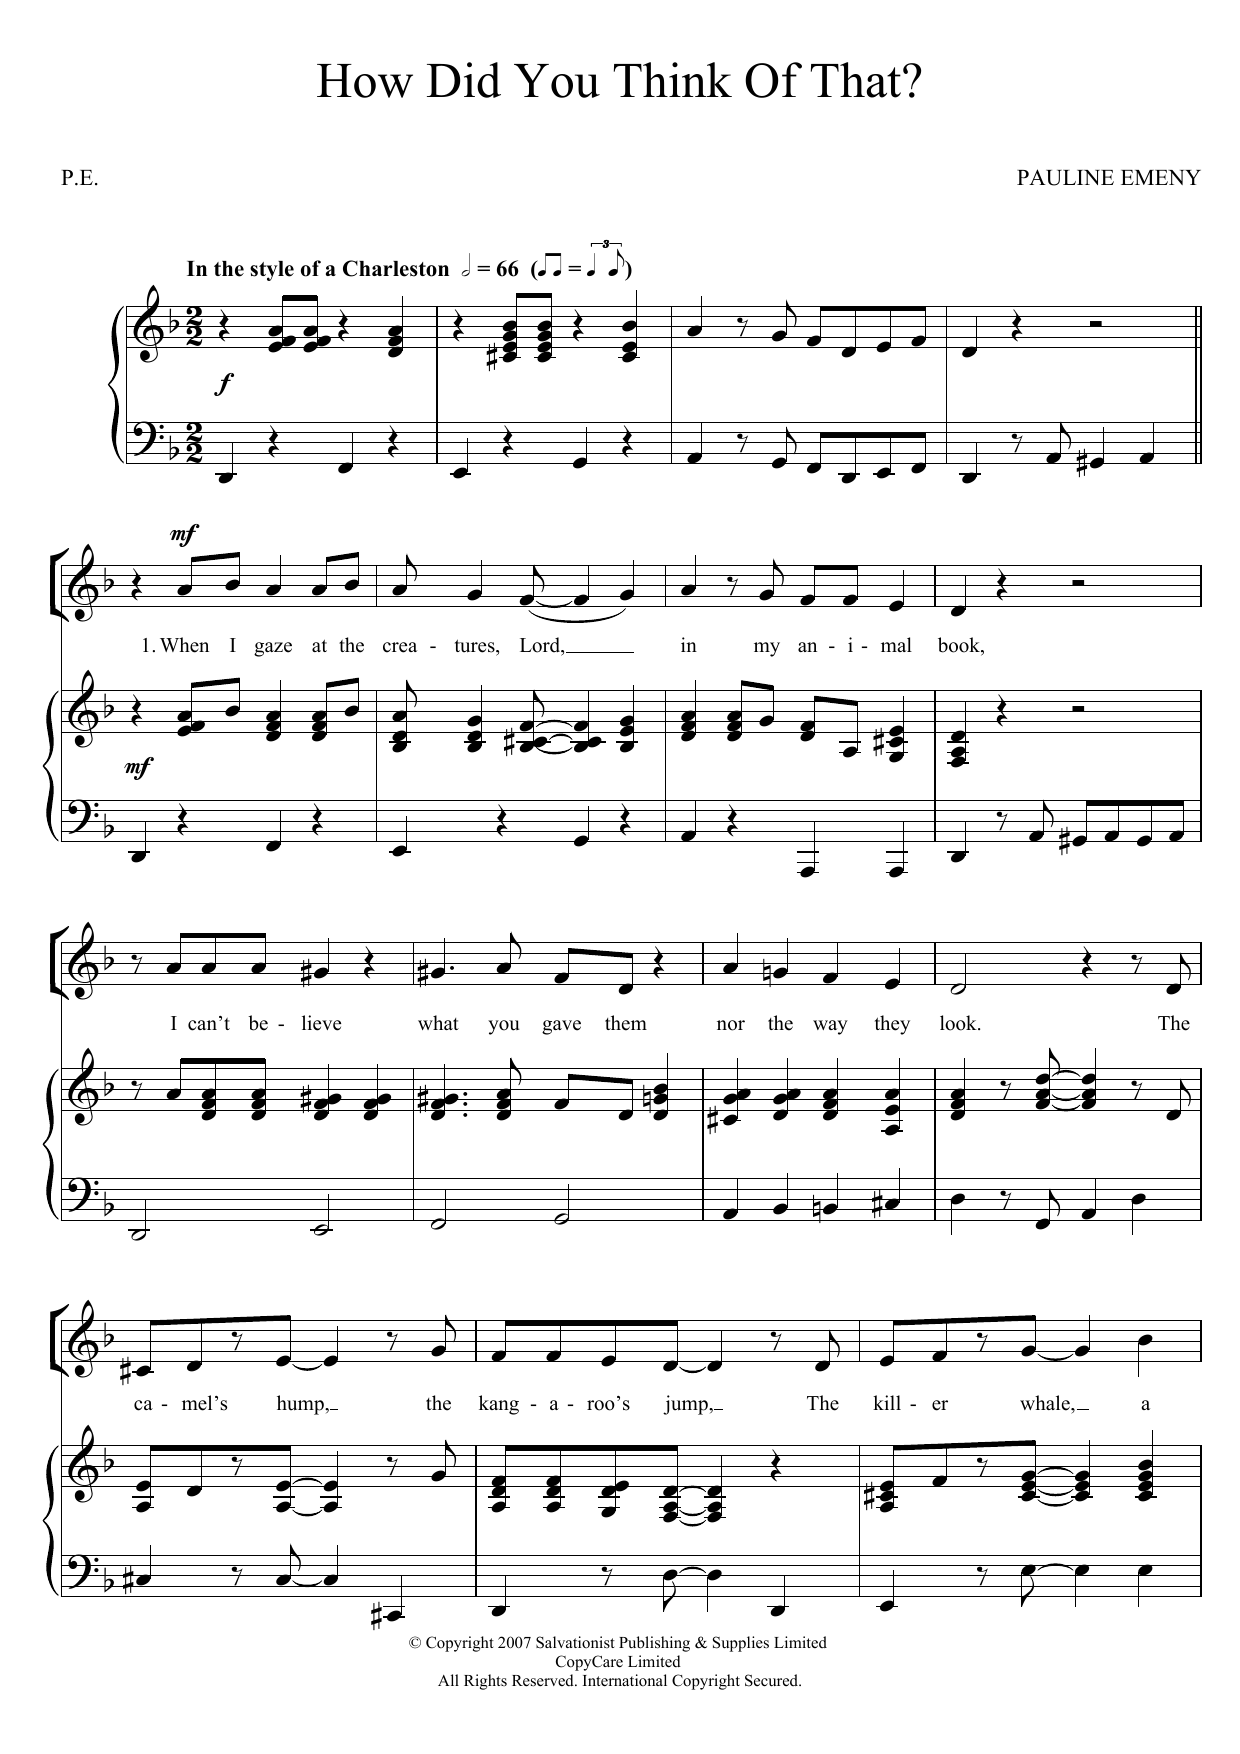 Download The Salvation Army How Did You Think Of That Sheet Music